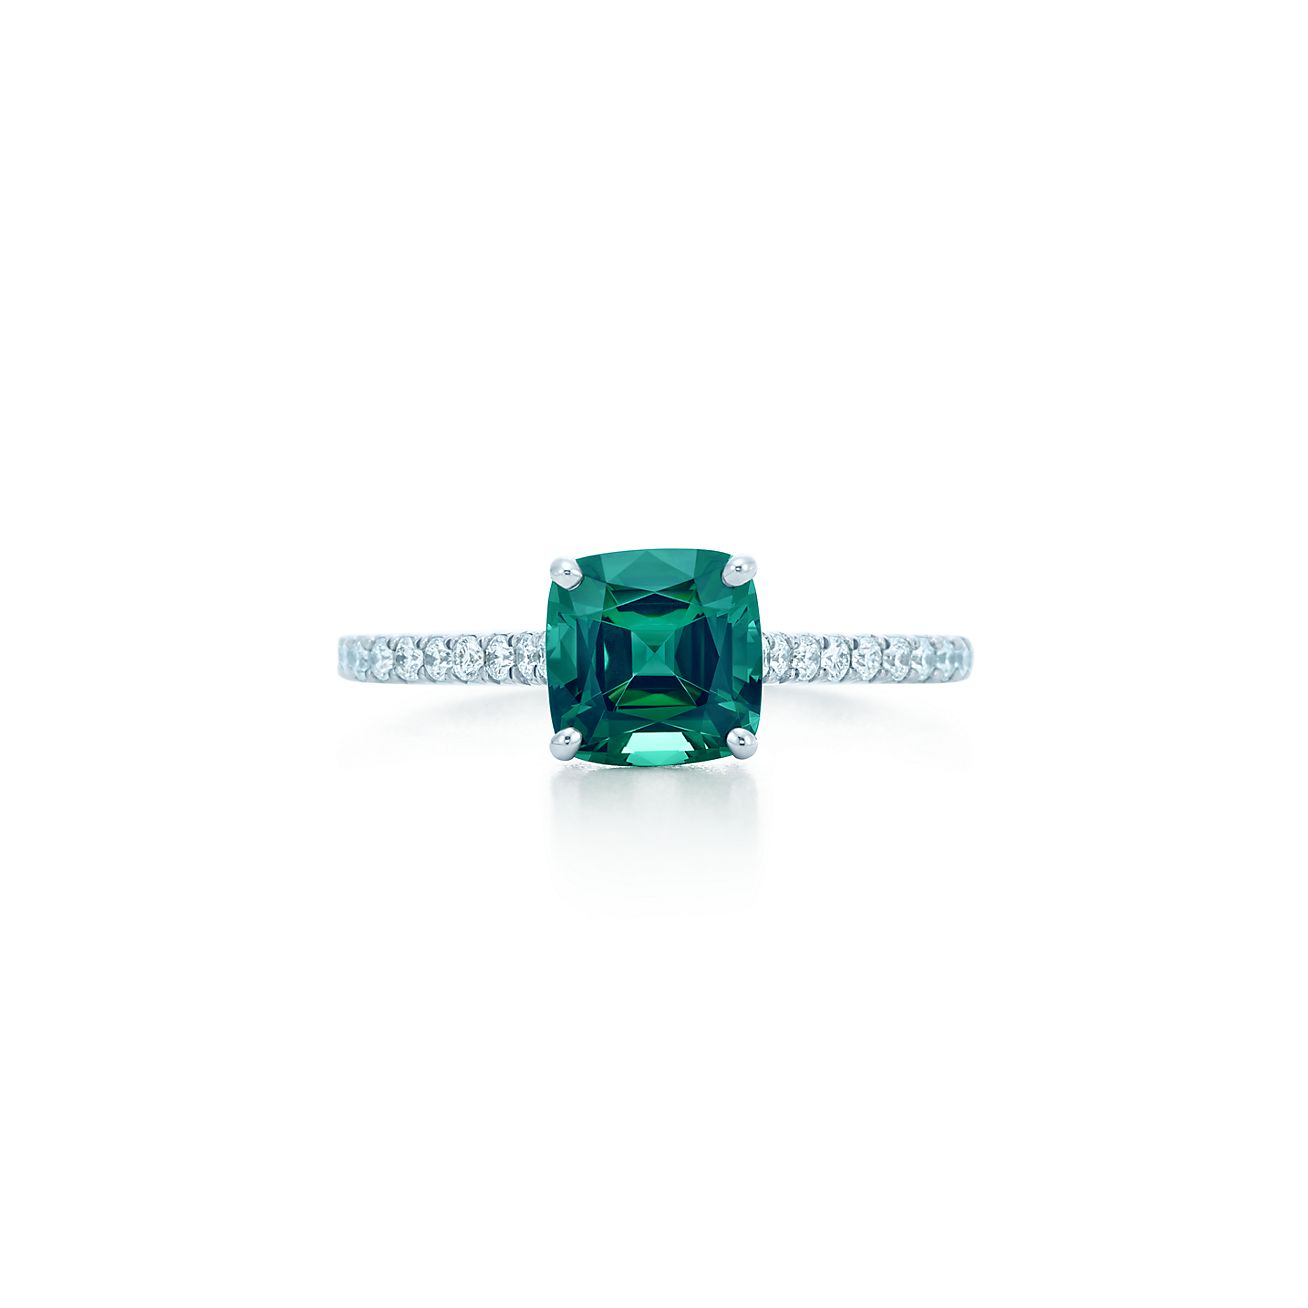 Tiffany Legacy® ring in platinum with a 